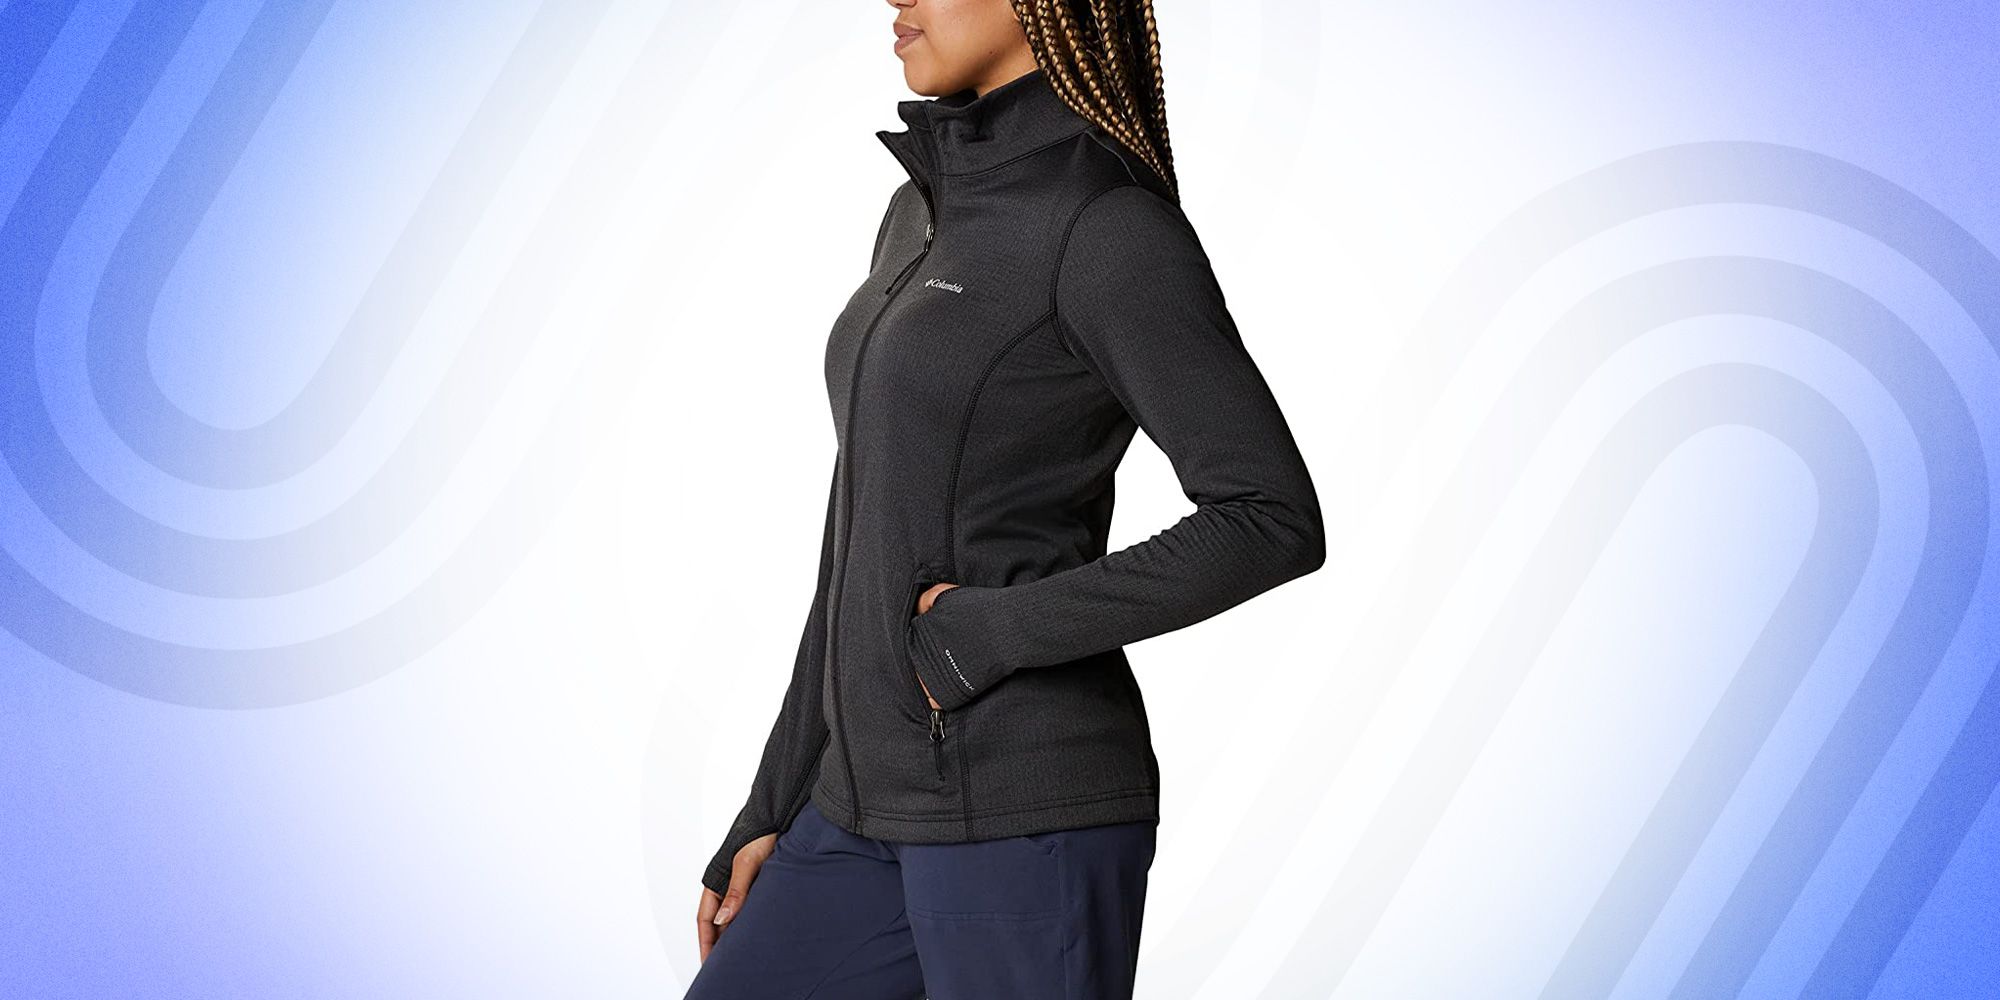 Time To Run Womens Long Sleeve Quick Dry Thermal Lightweight Grid Zip Neck Running/Training/Warm Up/Sports/Fitness Top 